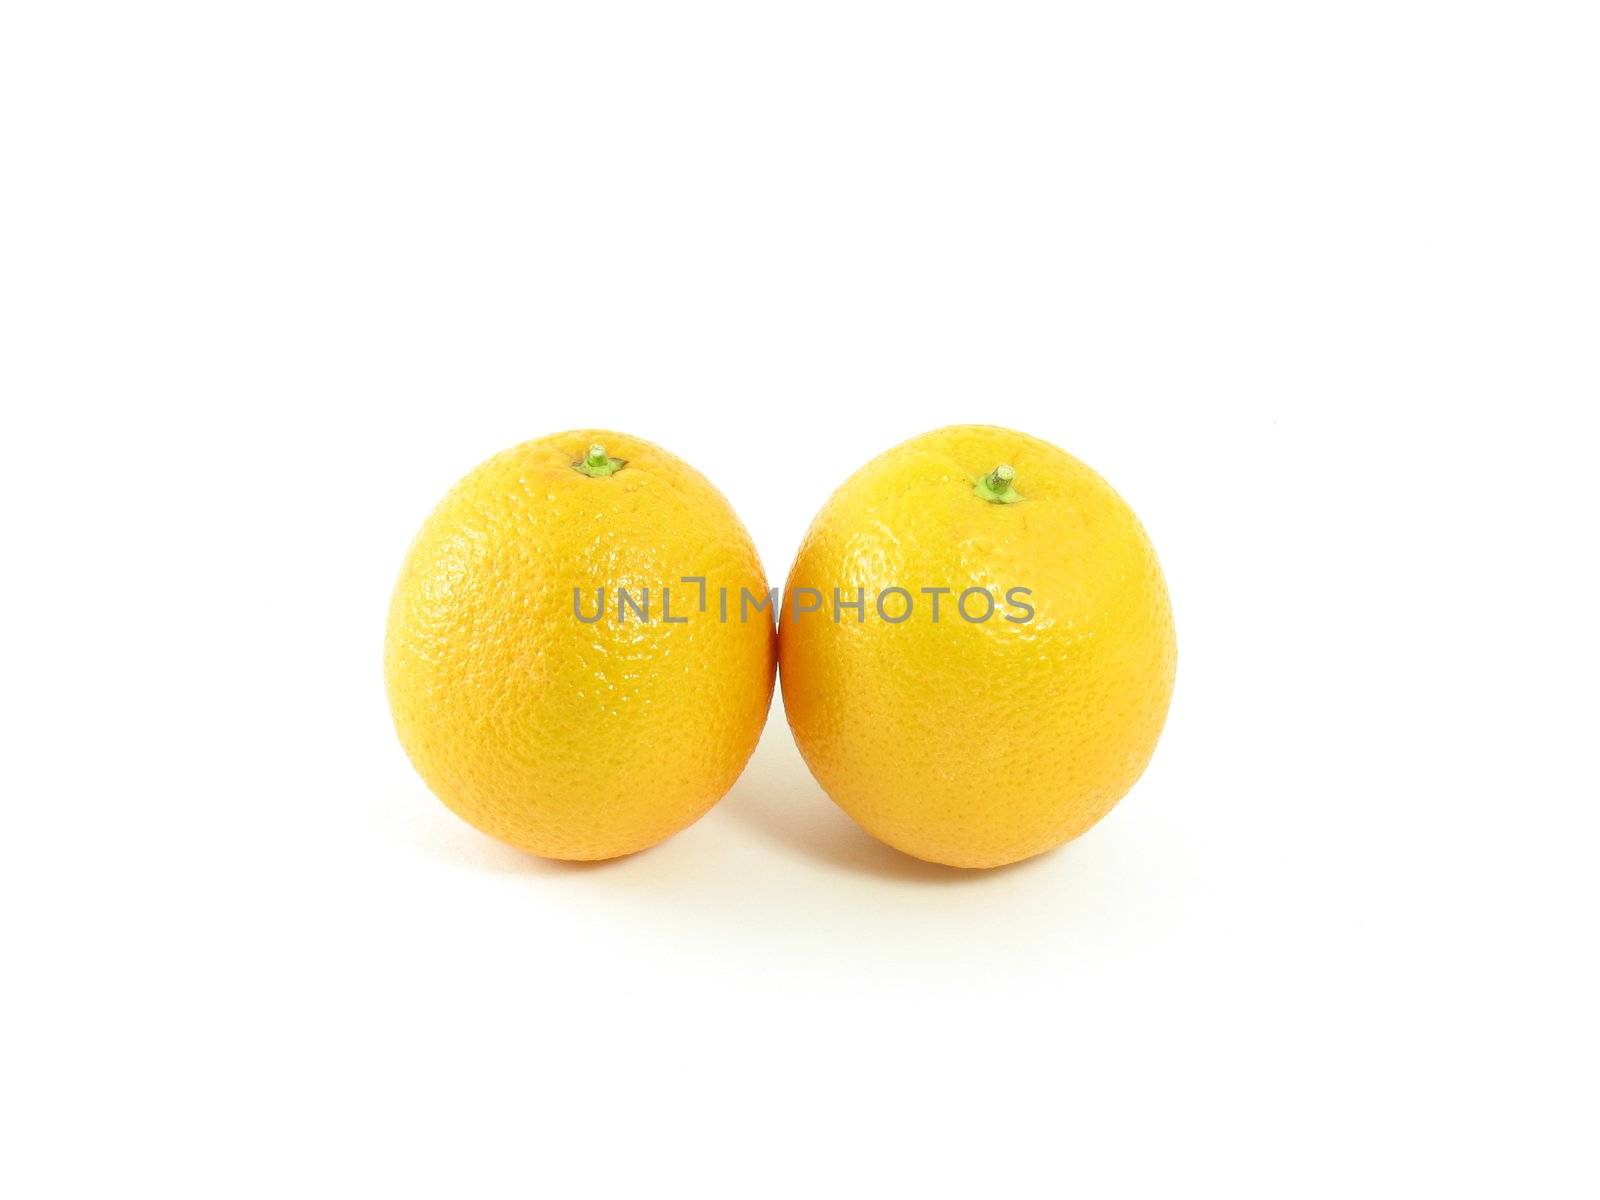 Image of 2 oranges that were grown in Florida